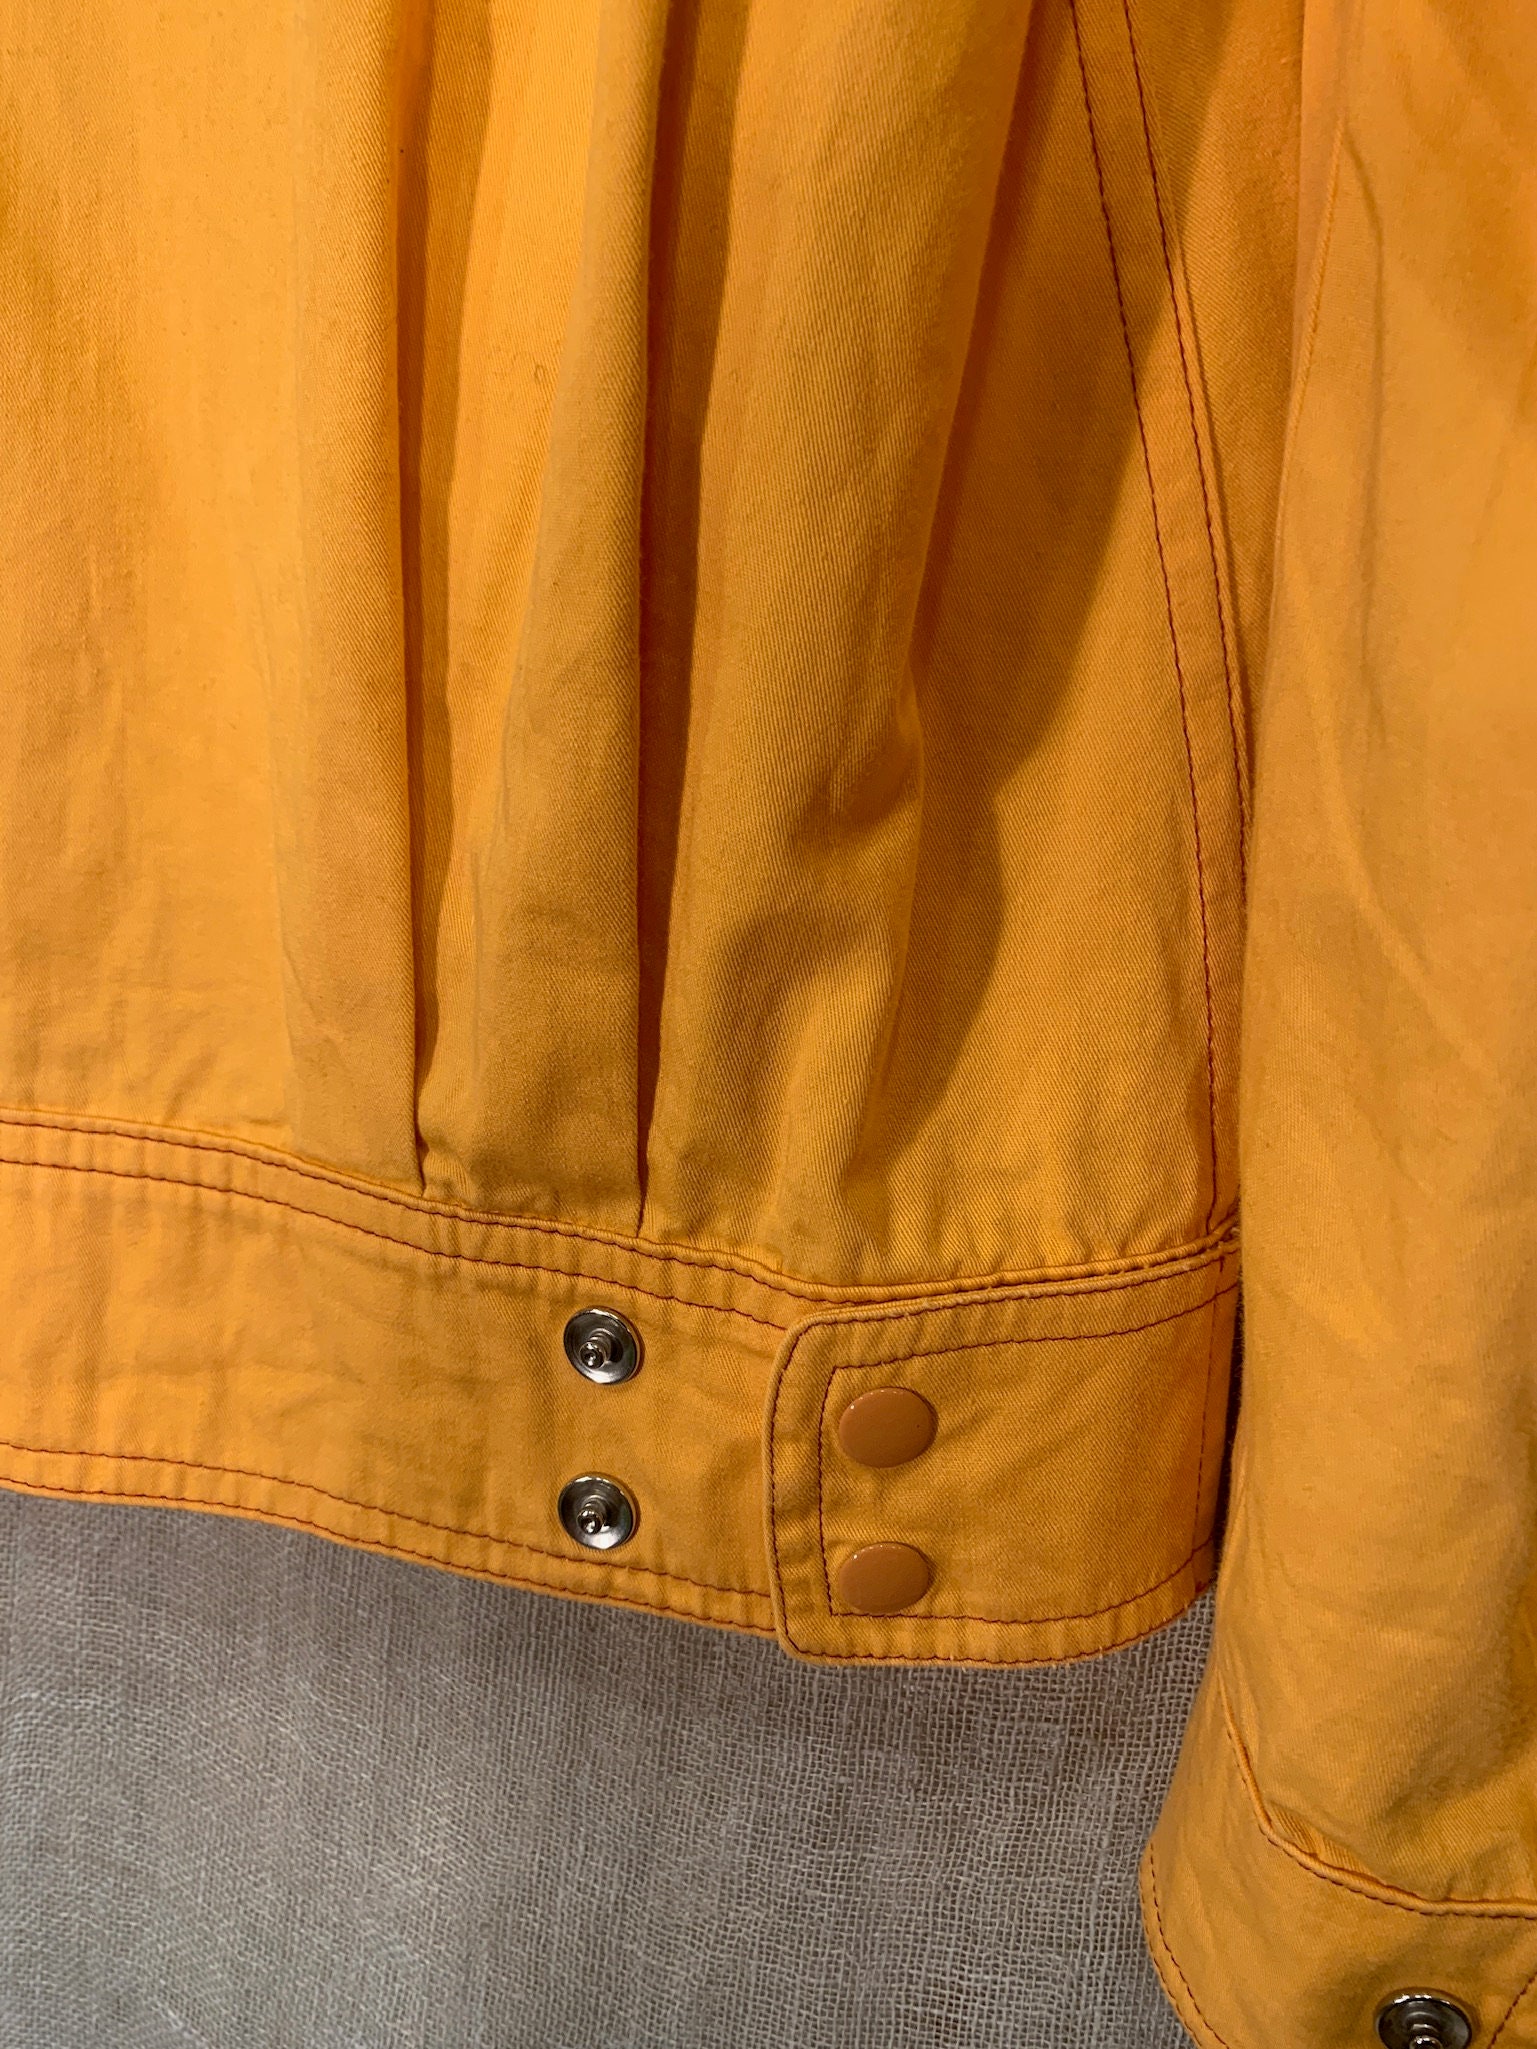 Vintage cotton Jacket in Canary Yellow with cool overstitching | Etsy